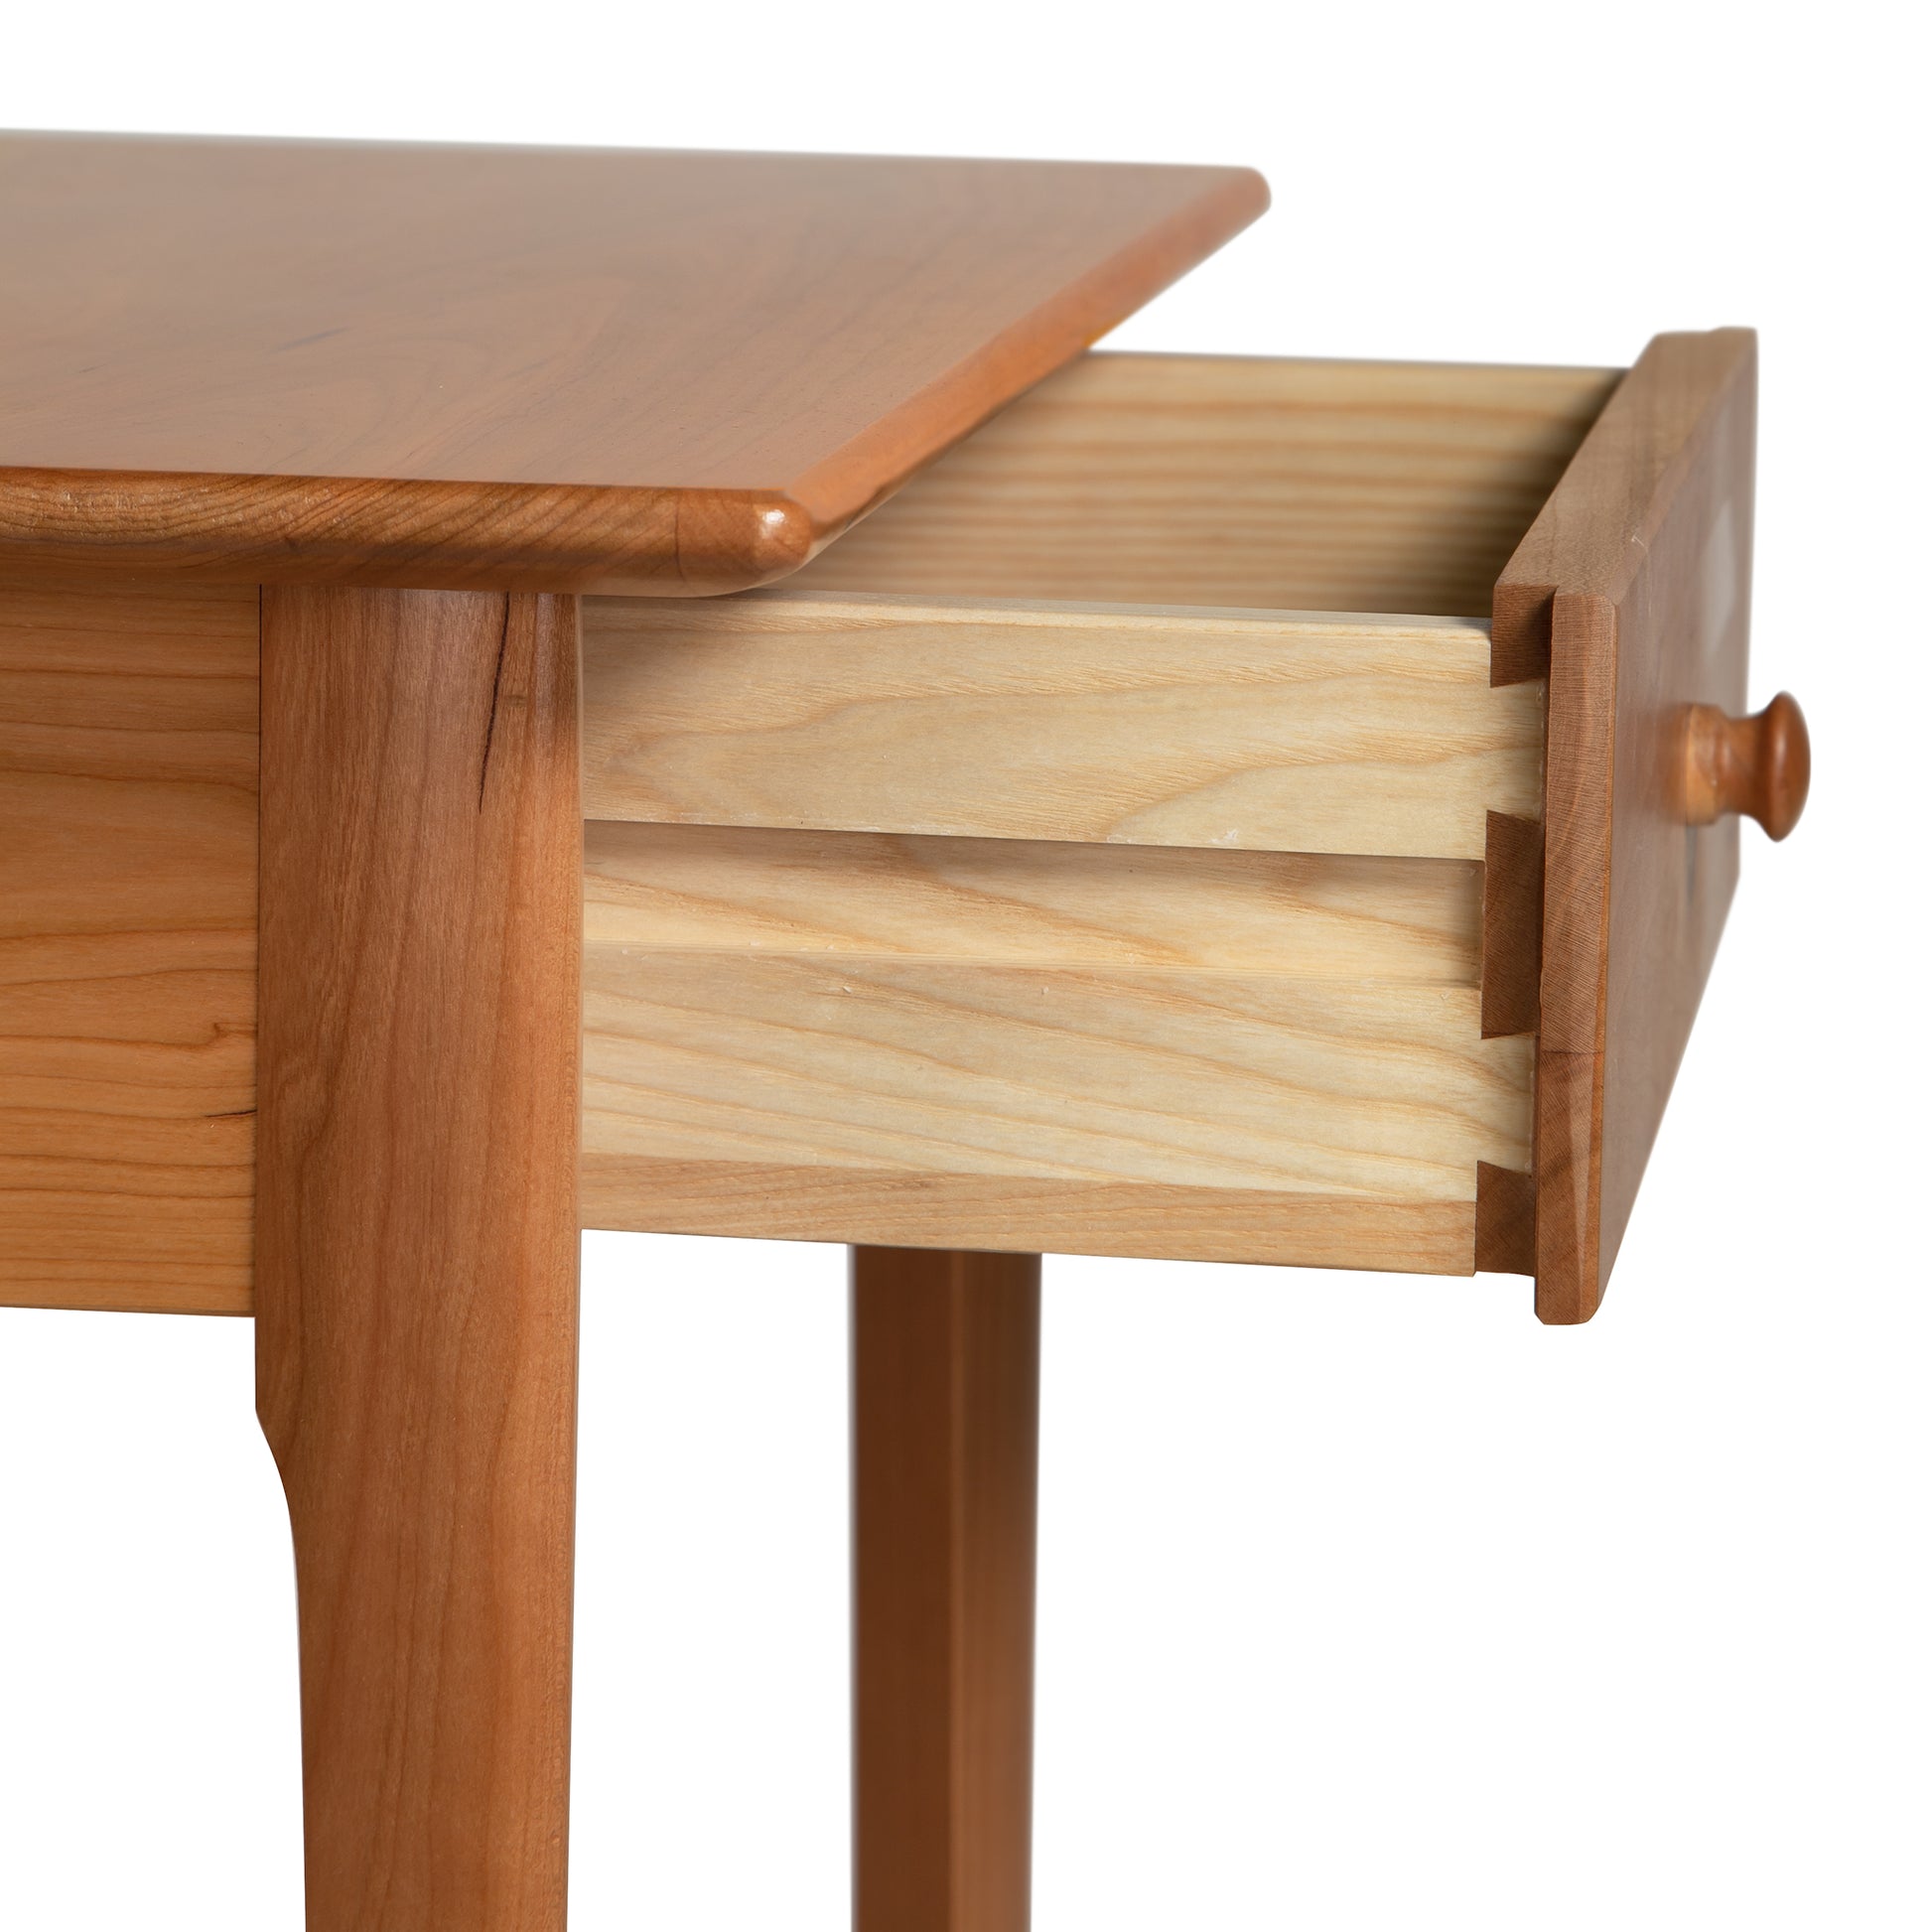 Copeland Furniture's Sarah 1-Drawer Open Shelf Nightstand, showcasing its construction and design.